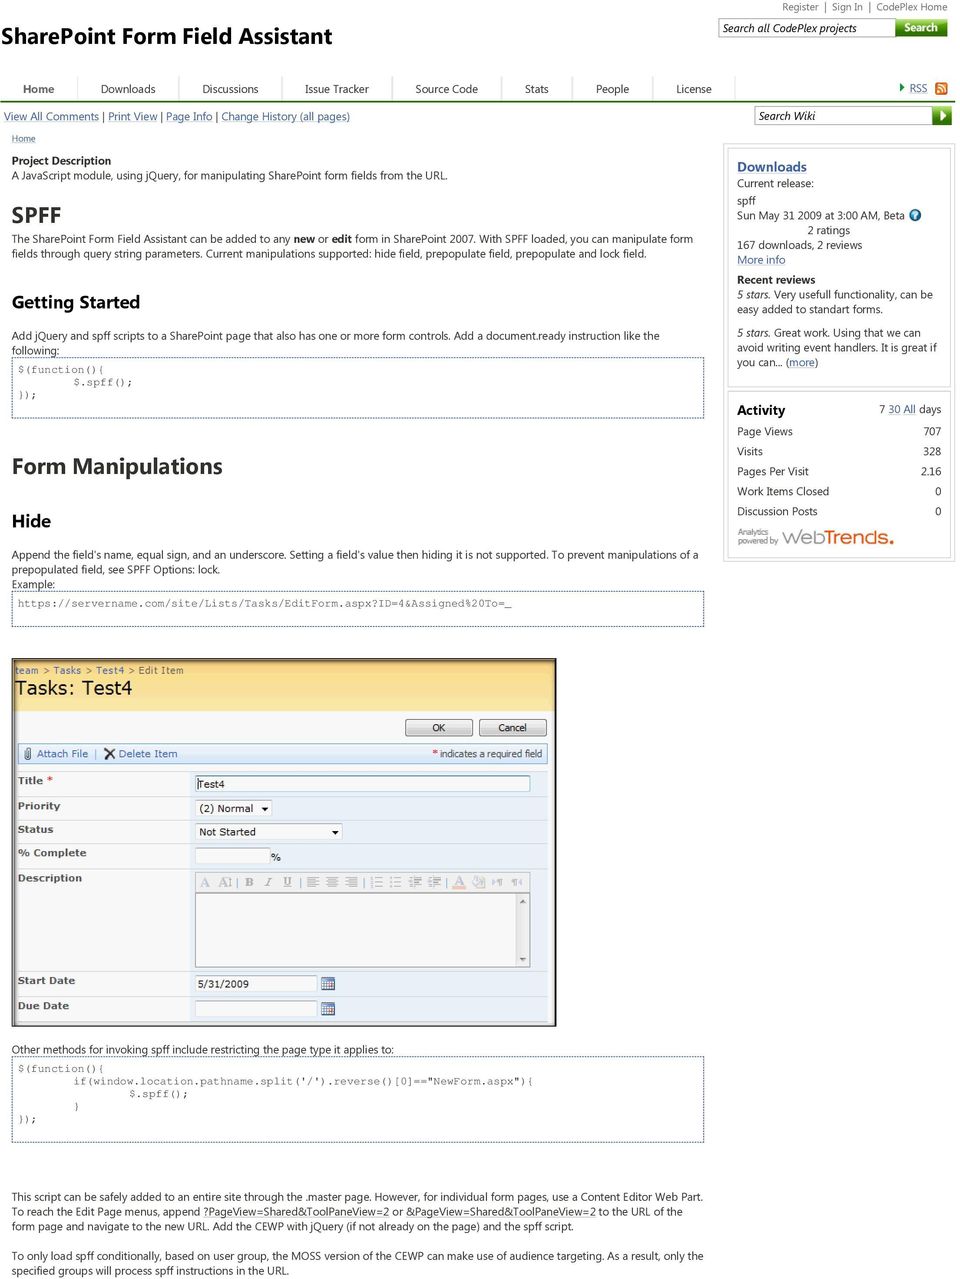 SPFF The SharePoint Form Field Assistant can be added to any new or edit form in SharePoint 2007. With SPFF loaded, you can manipulate form fields through query string parameters.